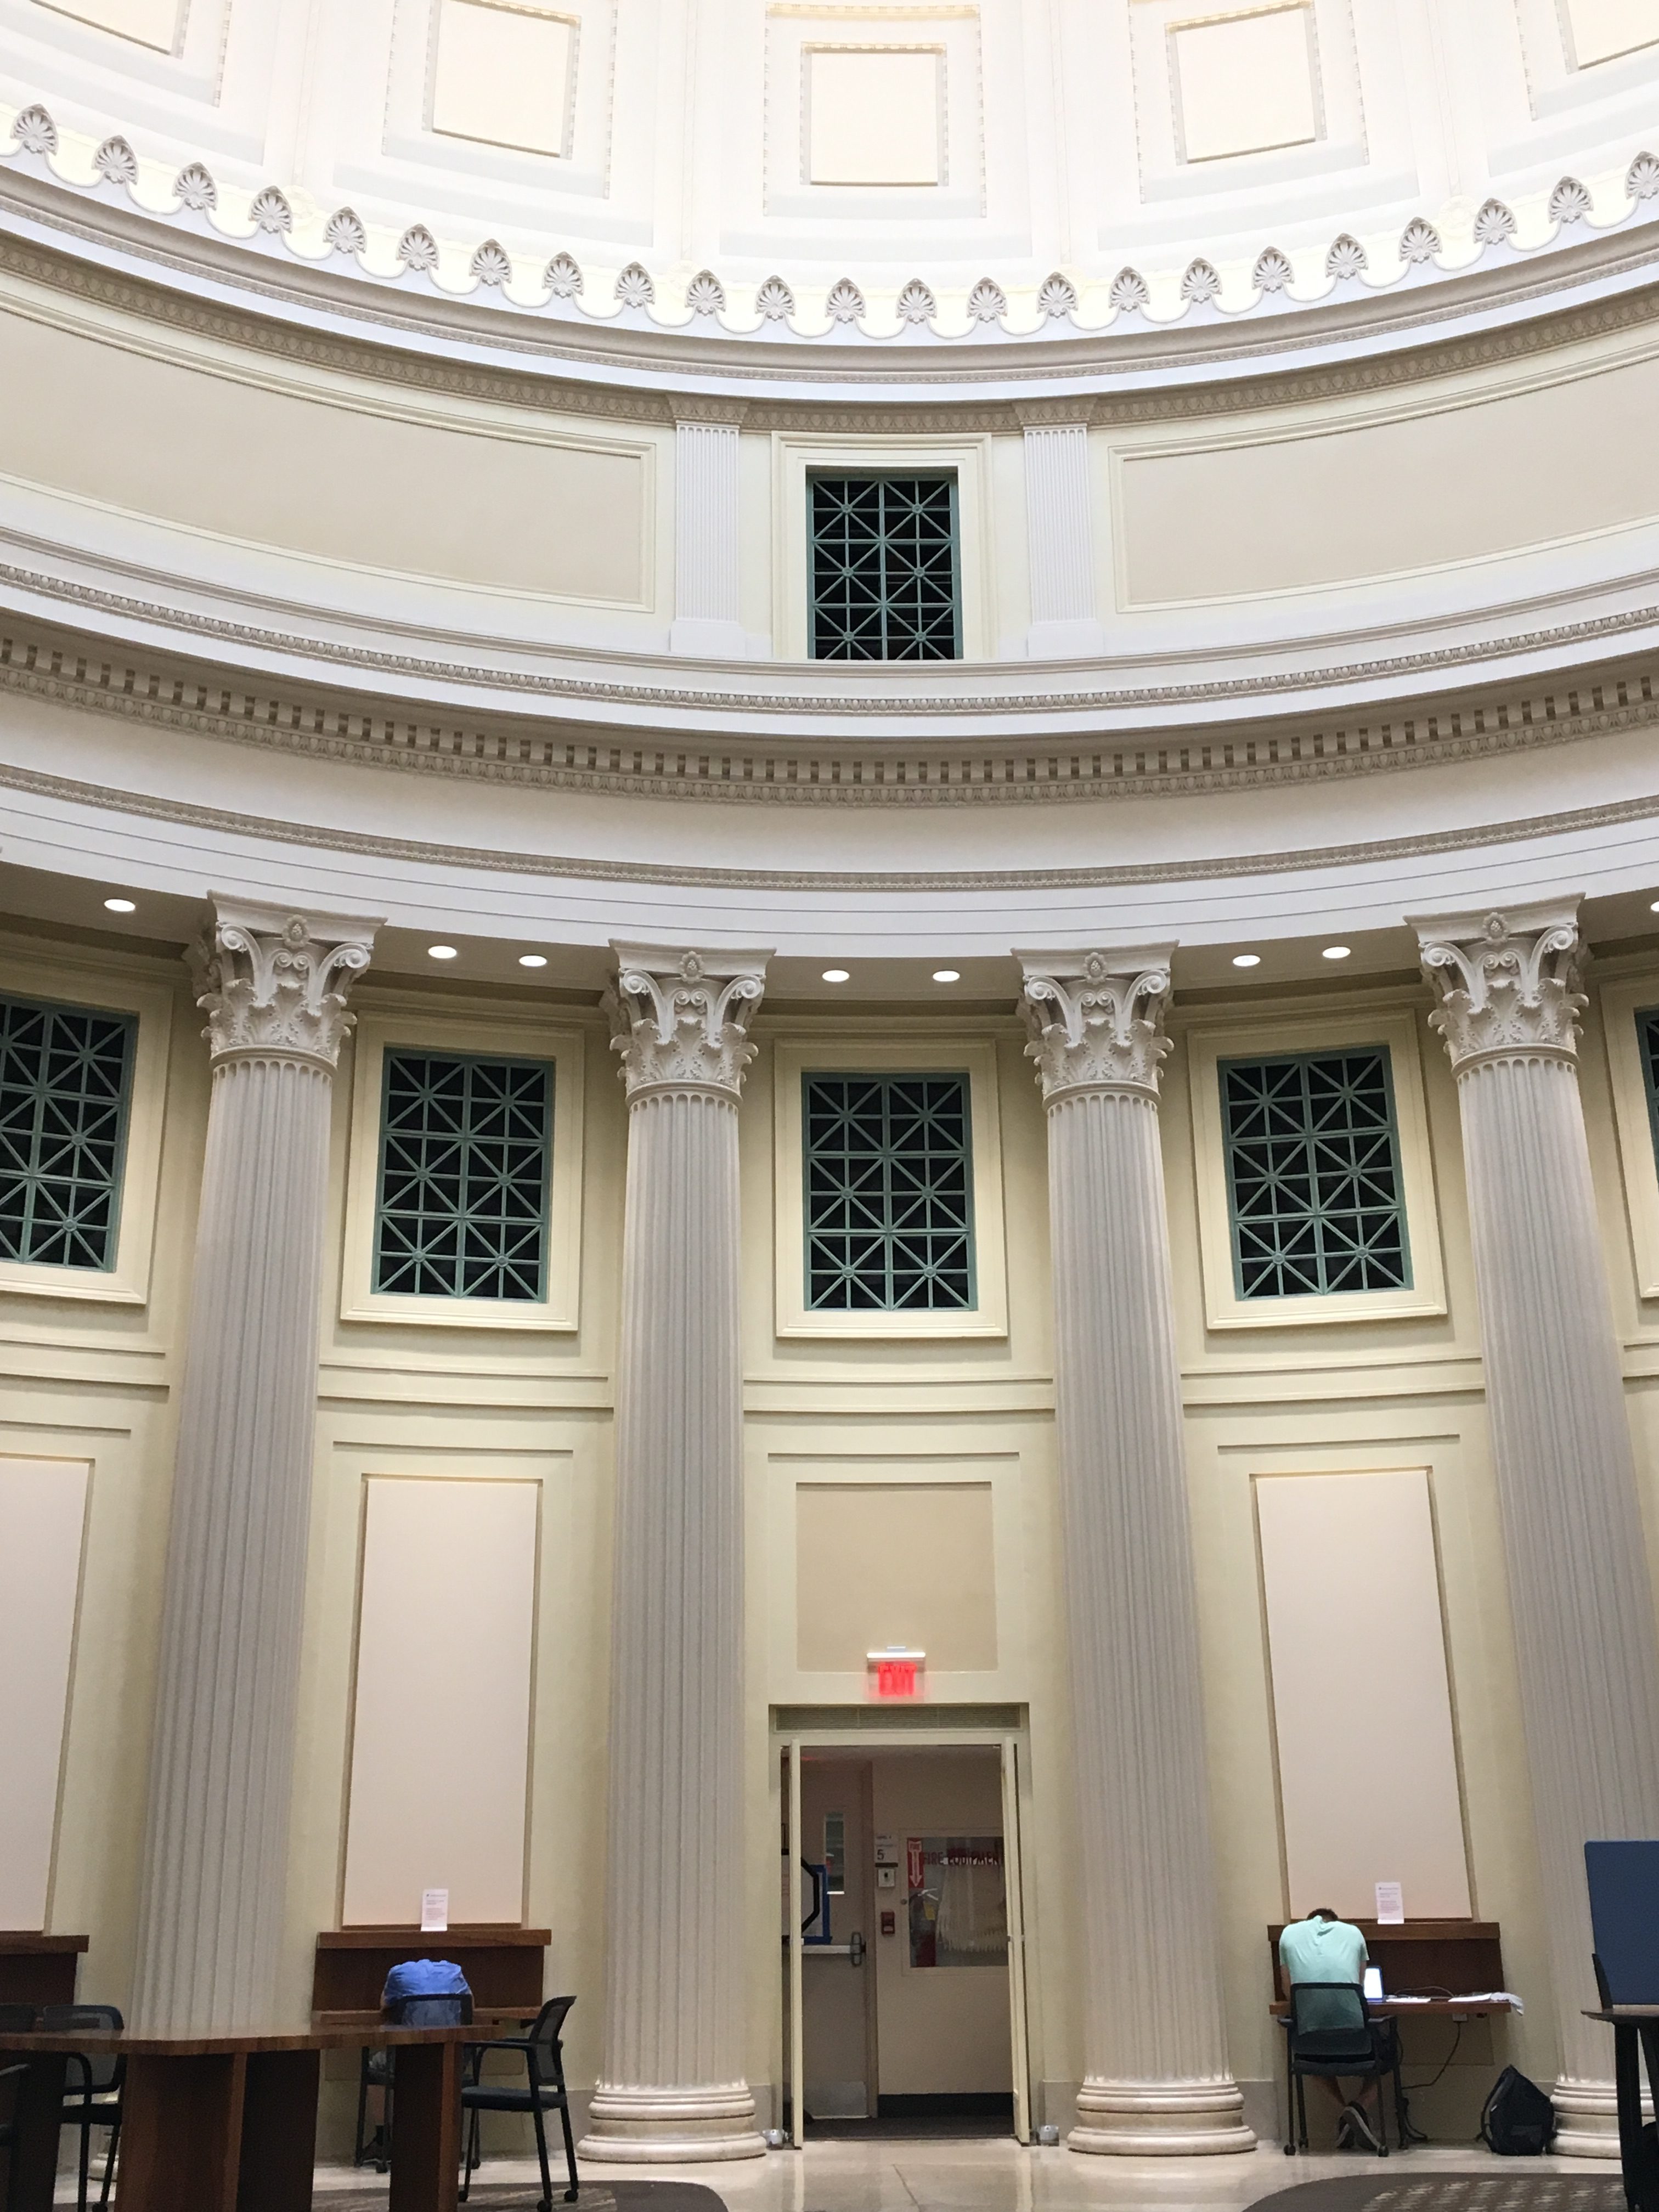 The side wall of Barker library, with the dome not visible. The wall is classical-looking and beige, with pillars supporting fancy moulding. At the bottom of the photo, an exit door and some study carrels are visible.